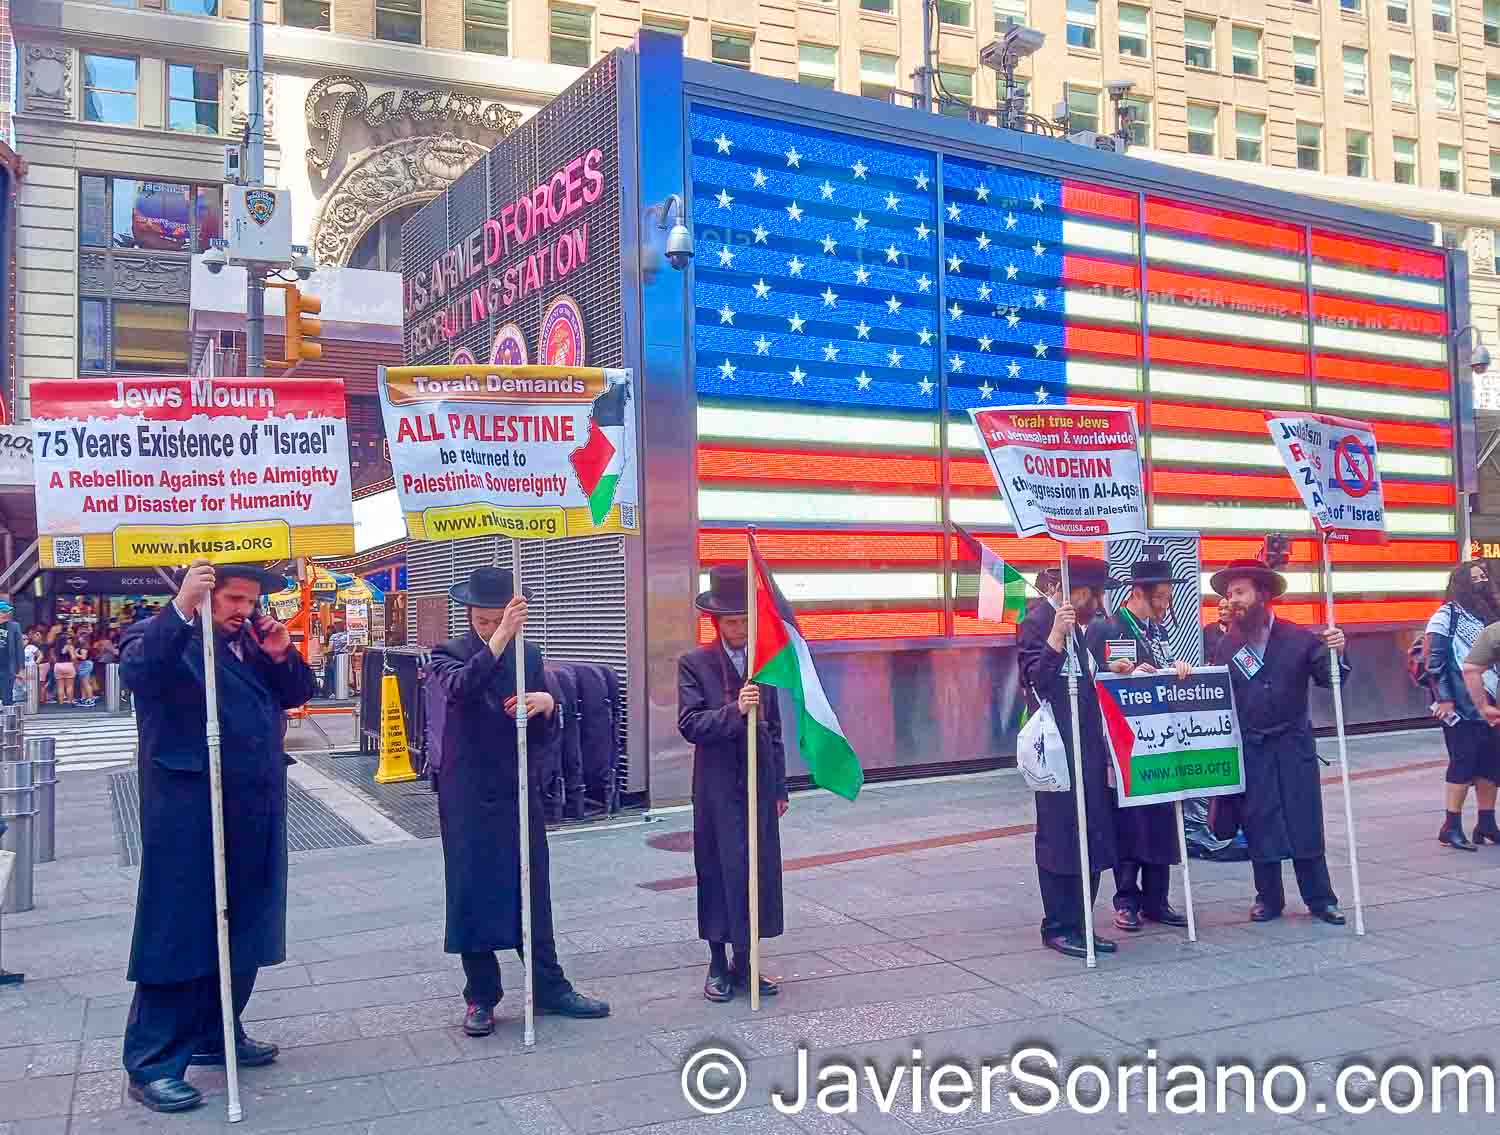 Sunday, May 14, 2023. Times Square, Manhattan; New York City – On Sunday, May 14, 2023, Palestinians, Anti-zionist Jews, Latinos, Latinas and others commemorated the 75th anniversary of the Palestinian Nakba.
Photo by Javier Soriano/www.JavierSoriano.com